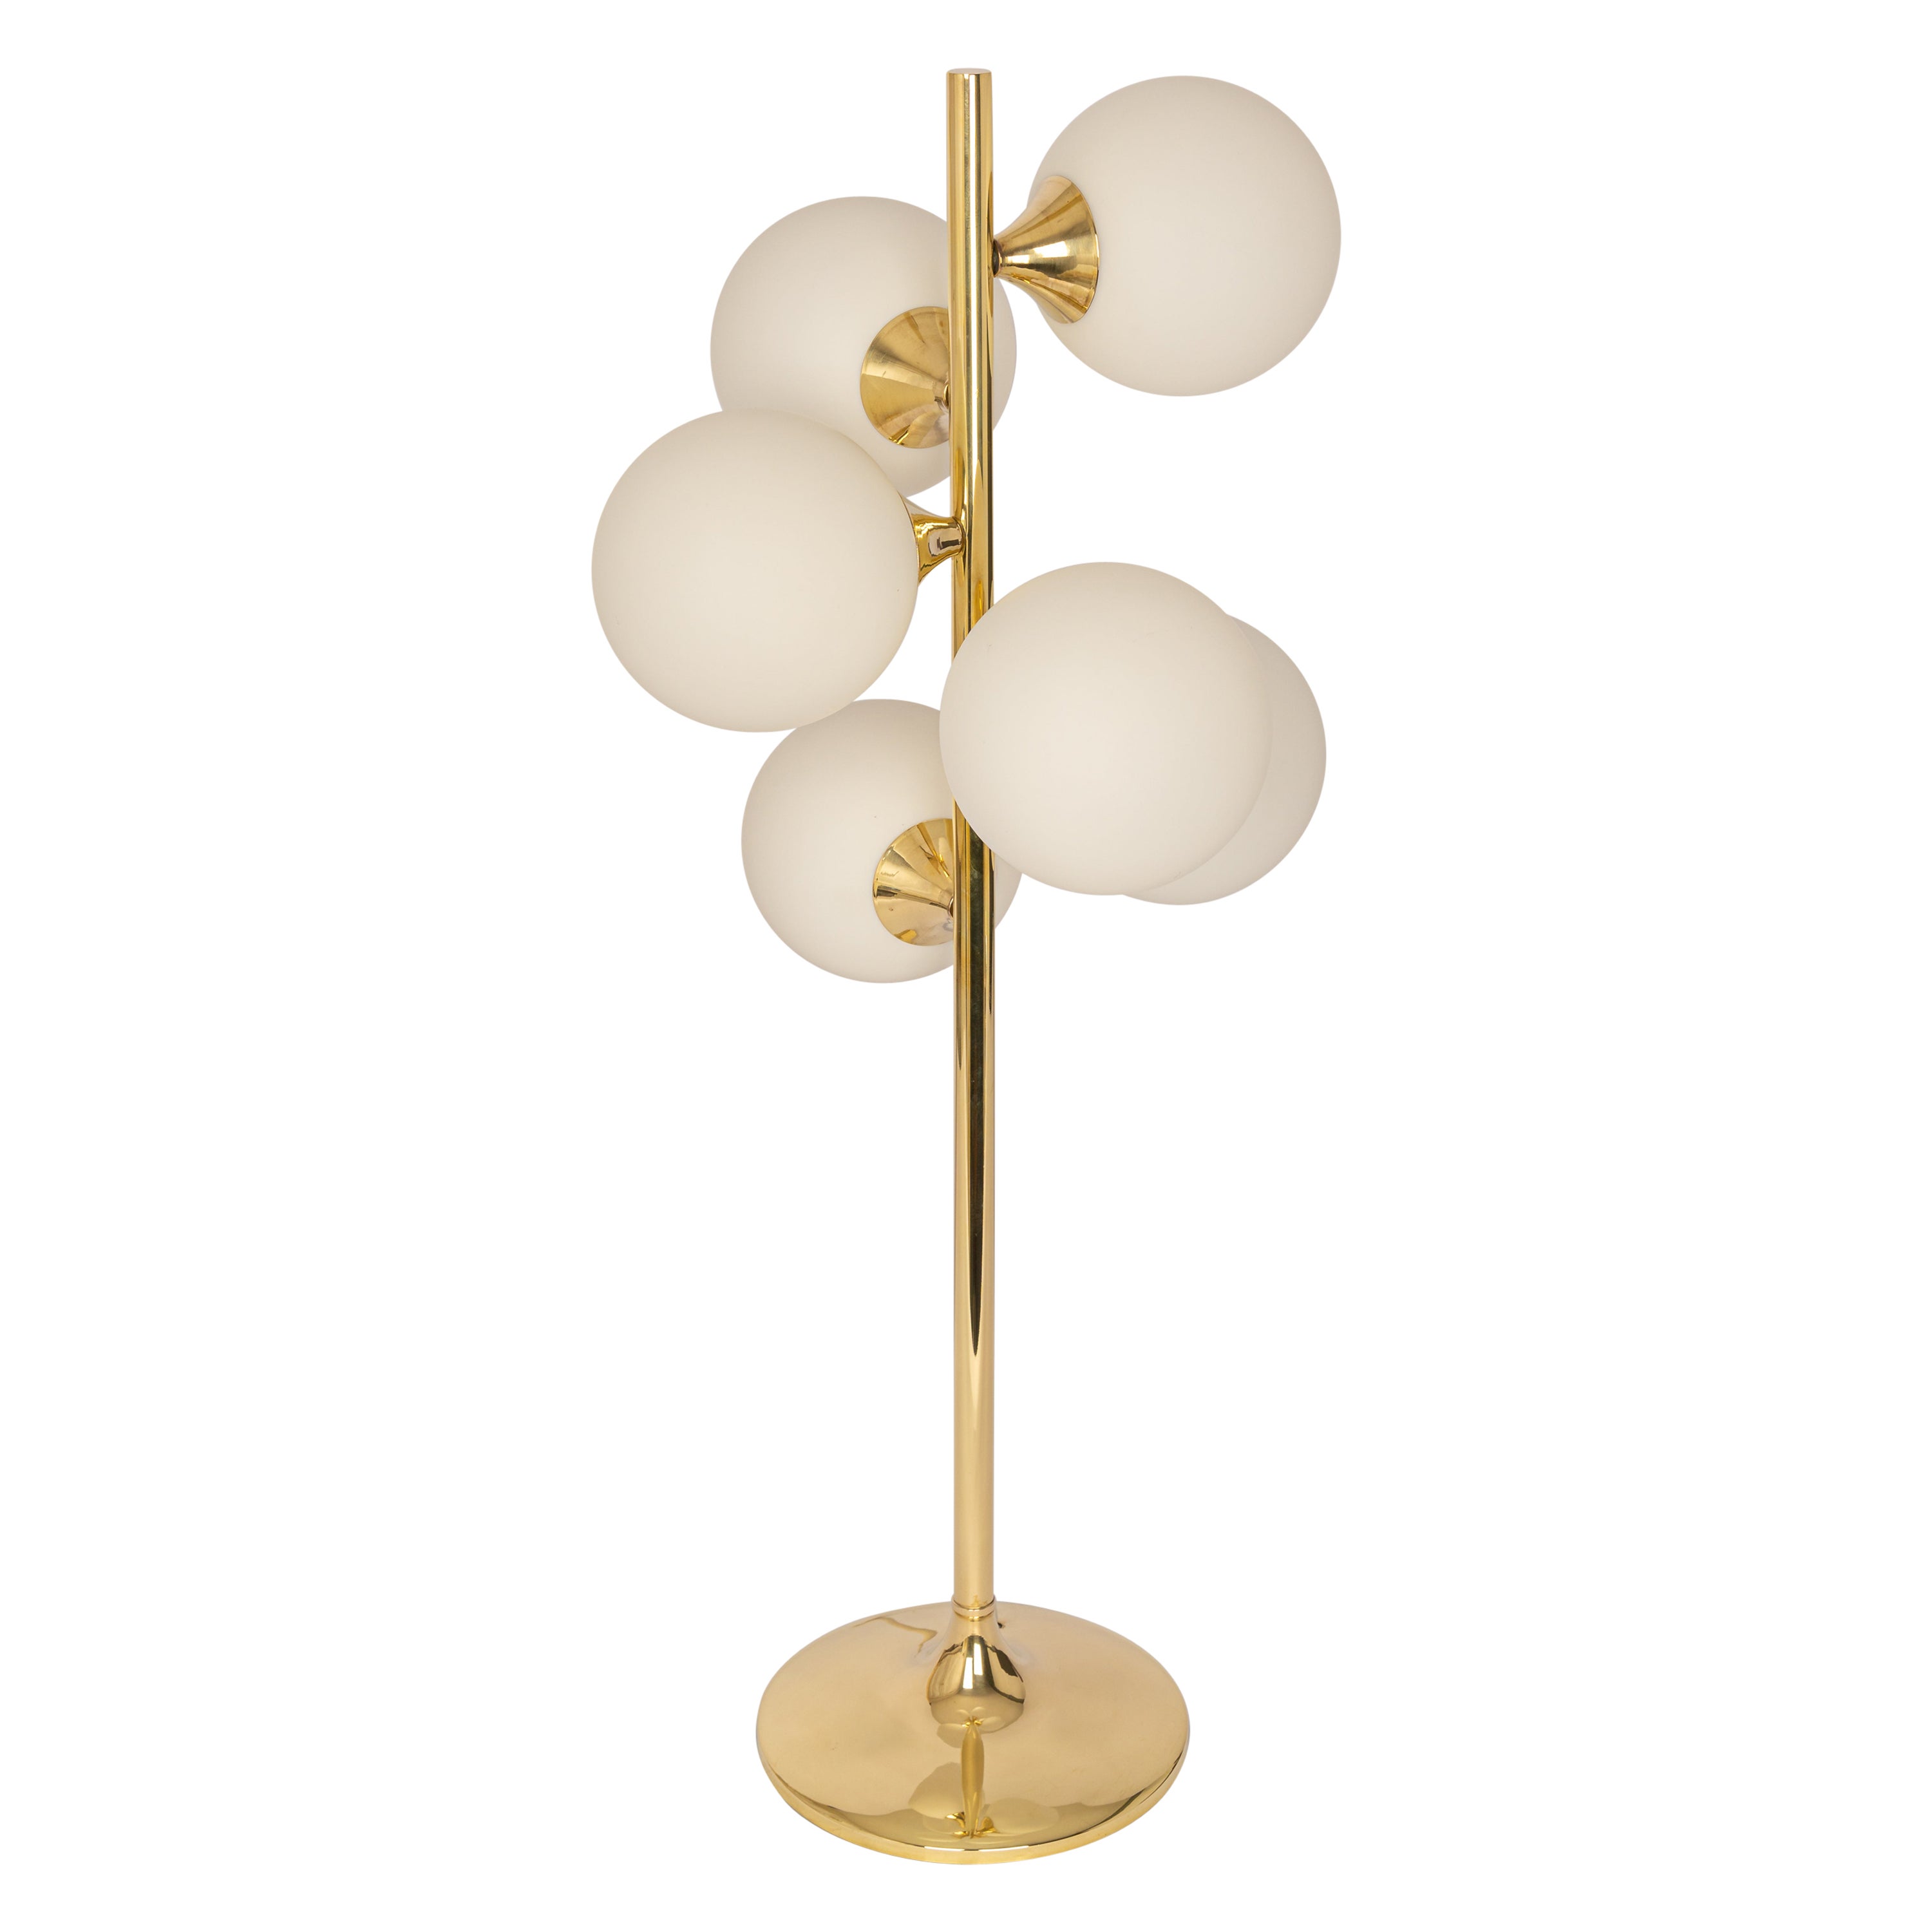 Stunning Large Brass Table / Floor Lamp by Kaiser, Germany, 1970s For Sale